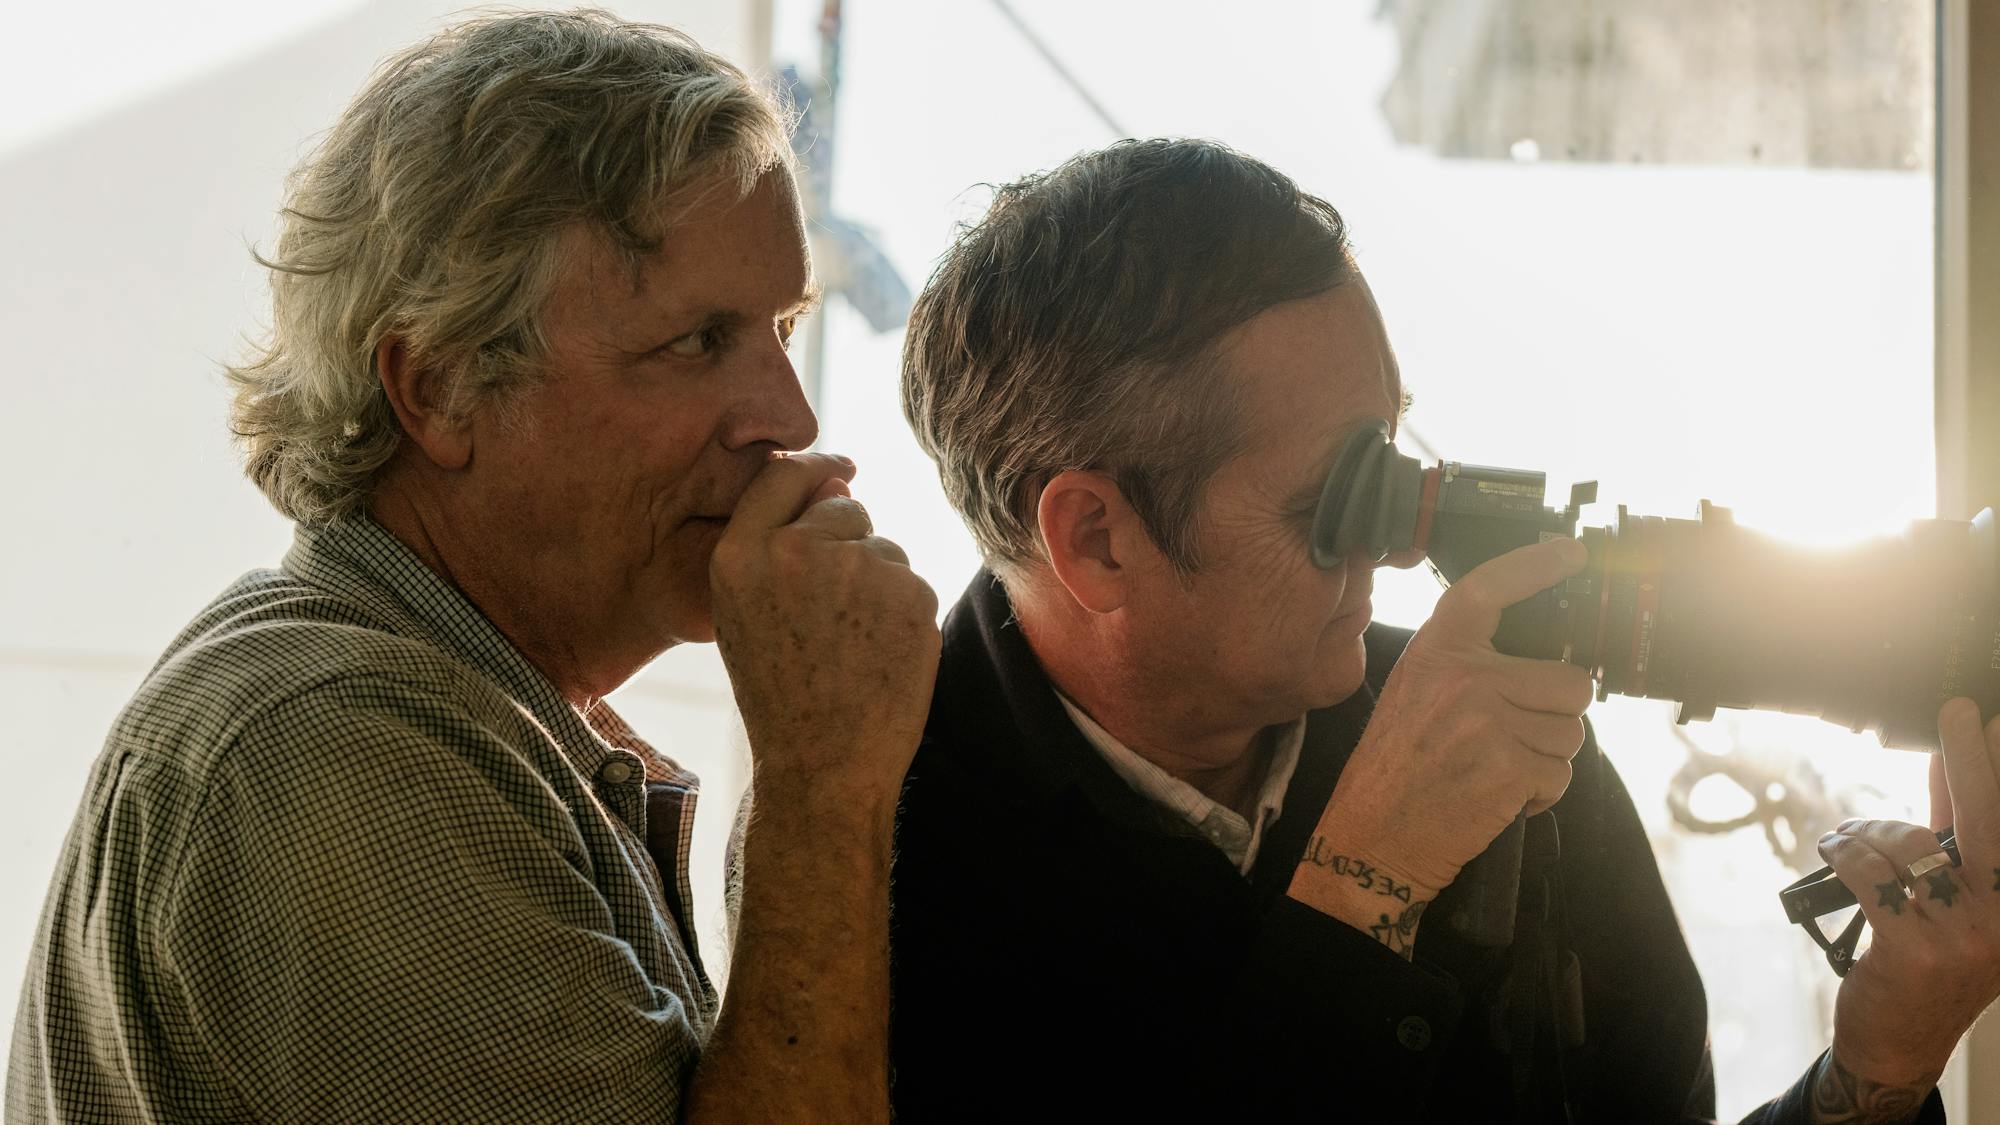 Todd Haynes stands behind Christopher Blauvelt as he looks through a camera.